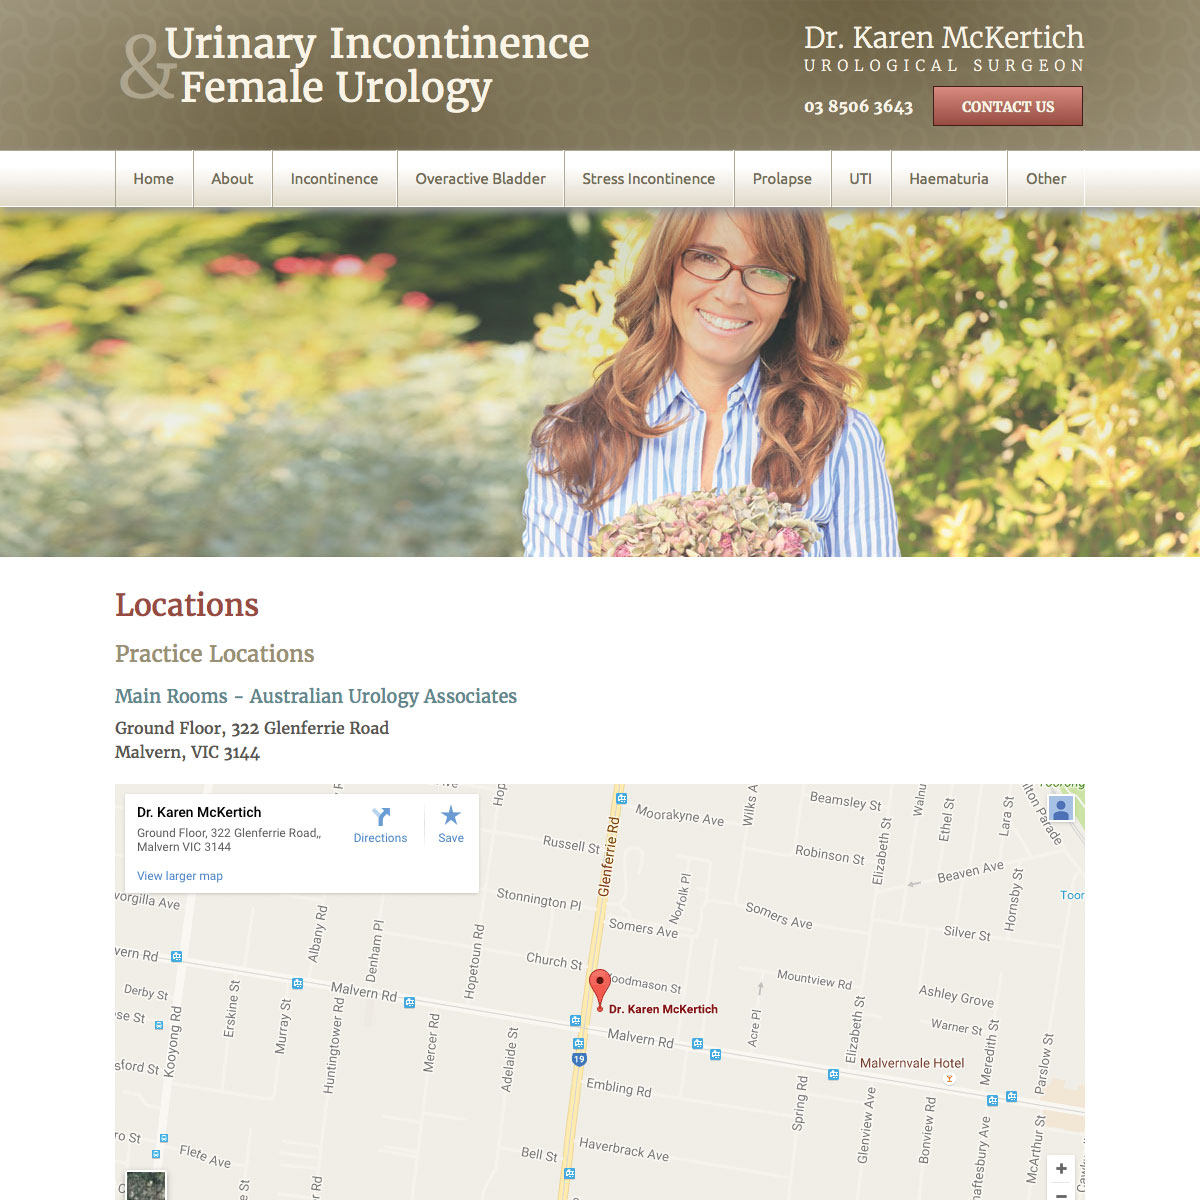 Urinary Incontinence and Female Urology - Locations